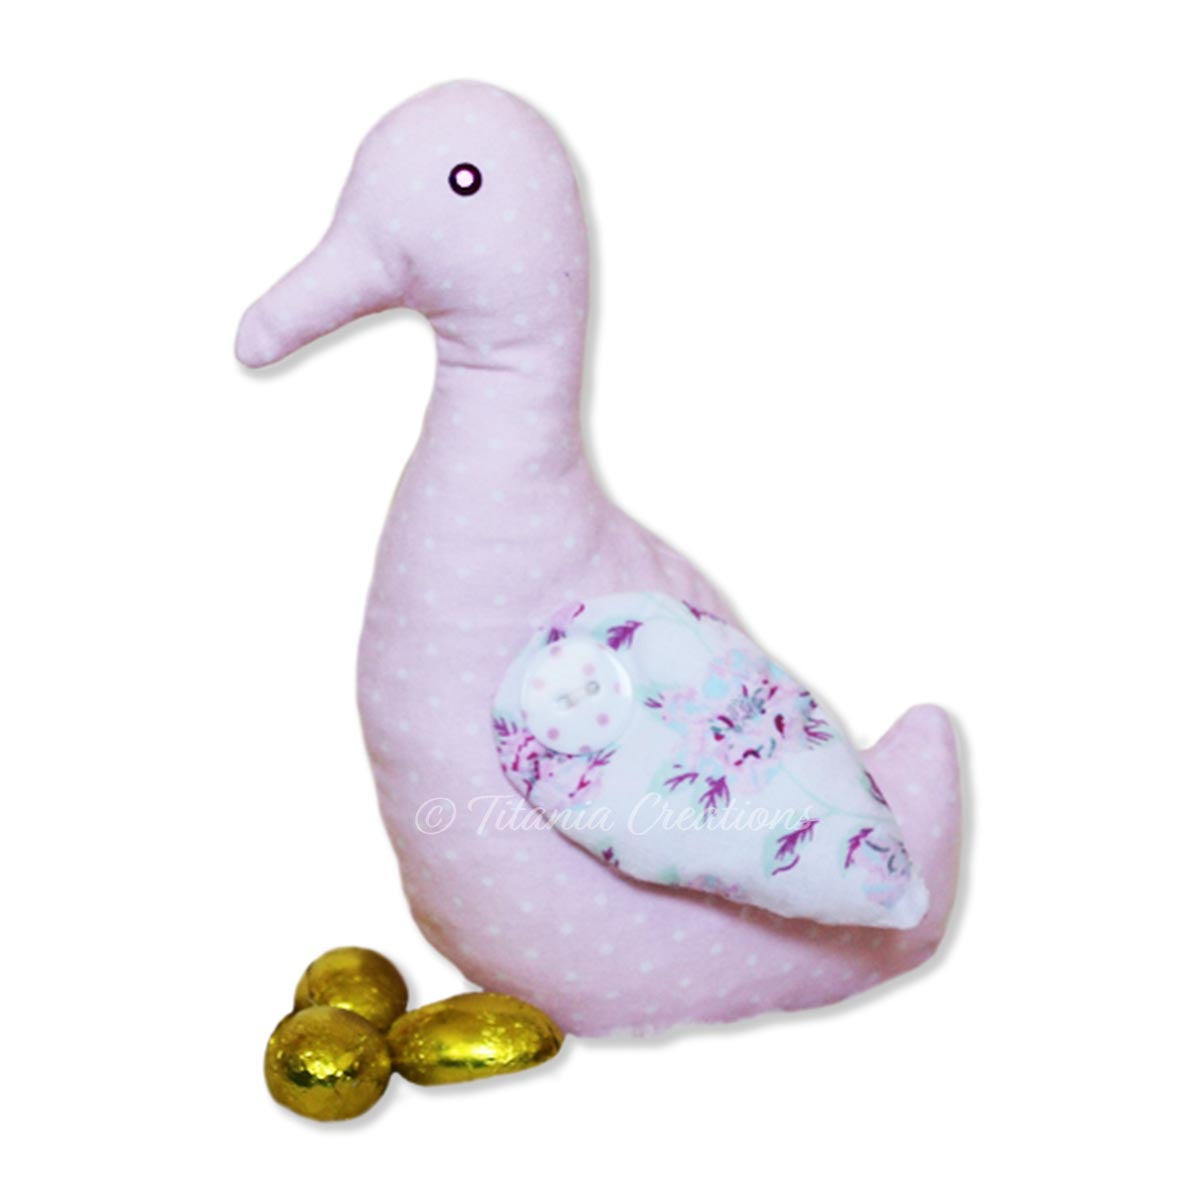 Download Ith Duck Stuffie 5x7 6x10 8x12 Titania Creations